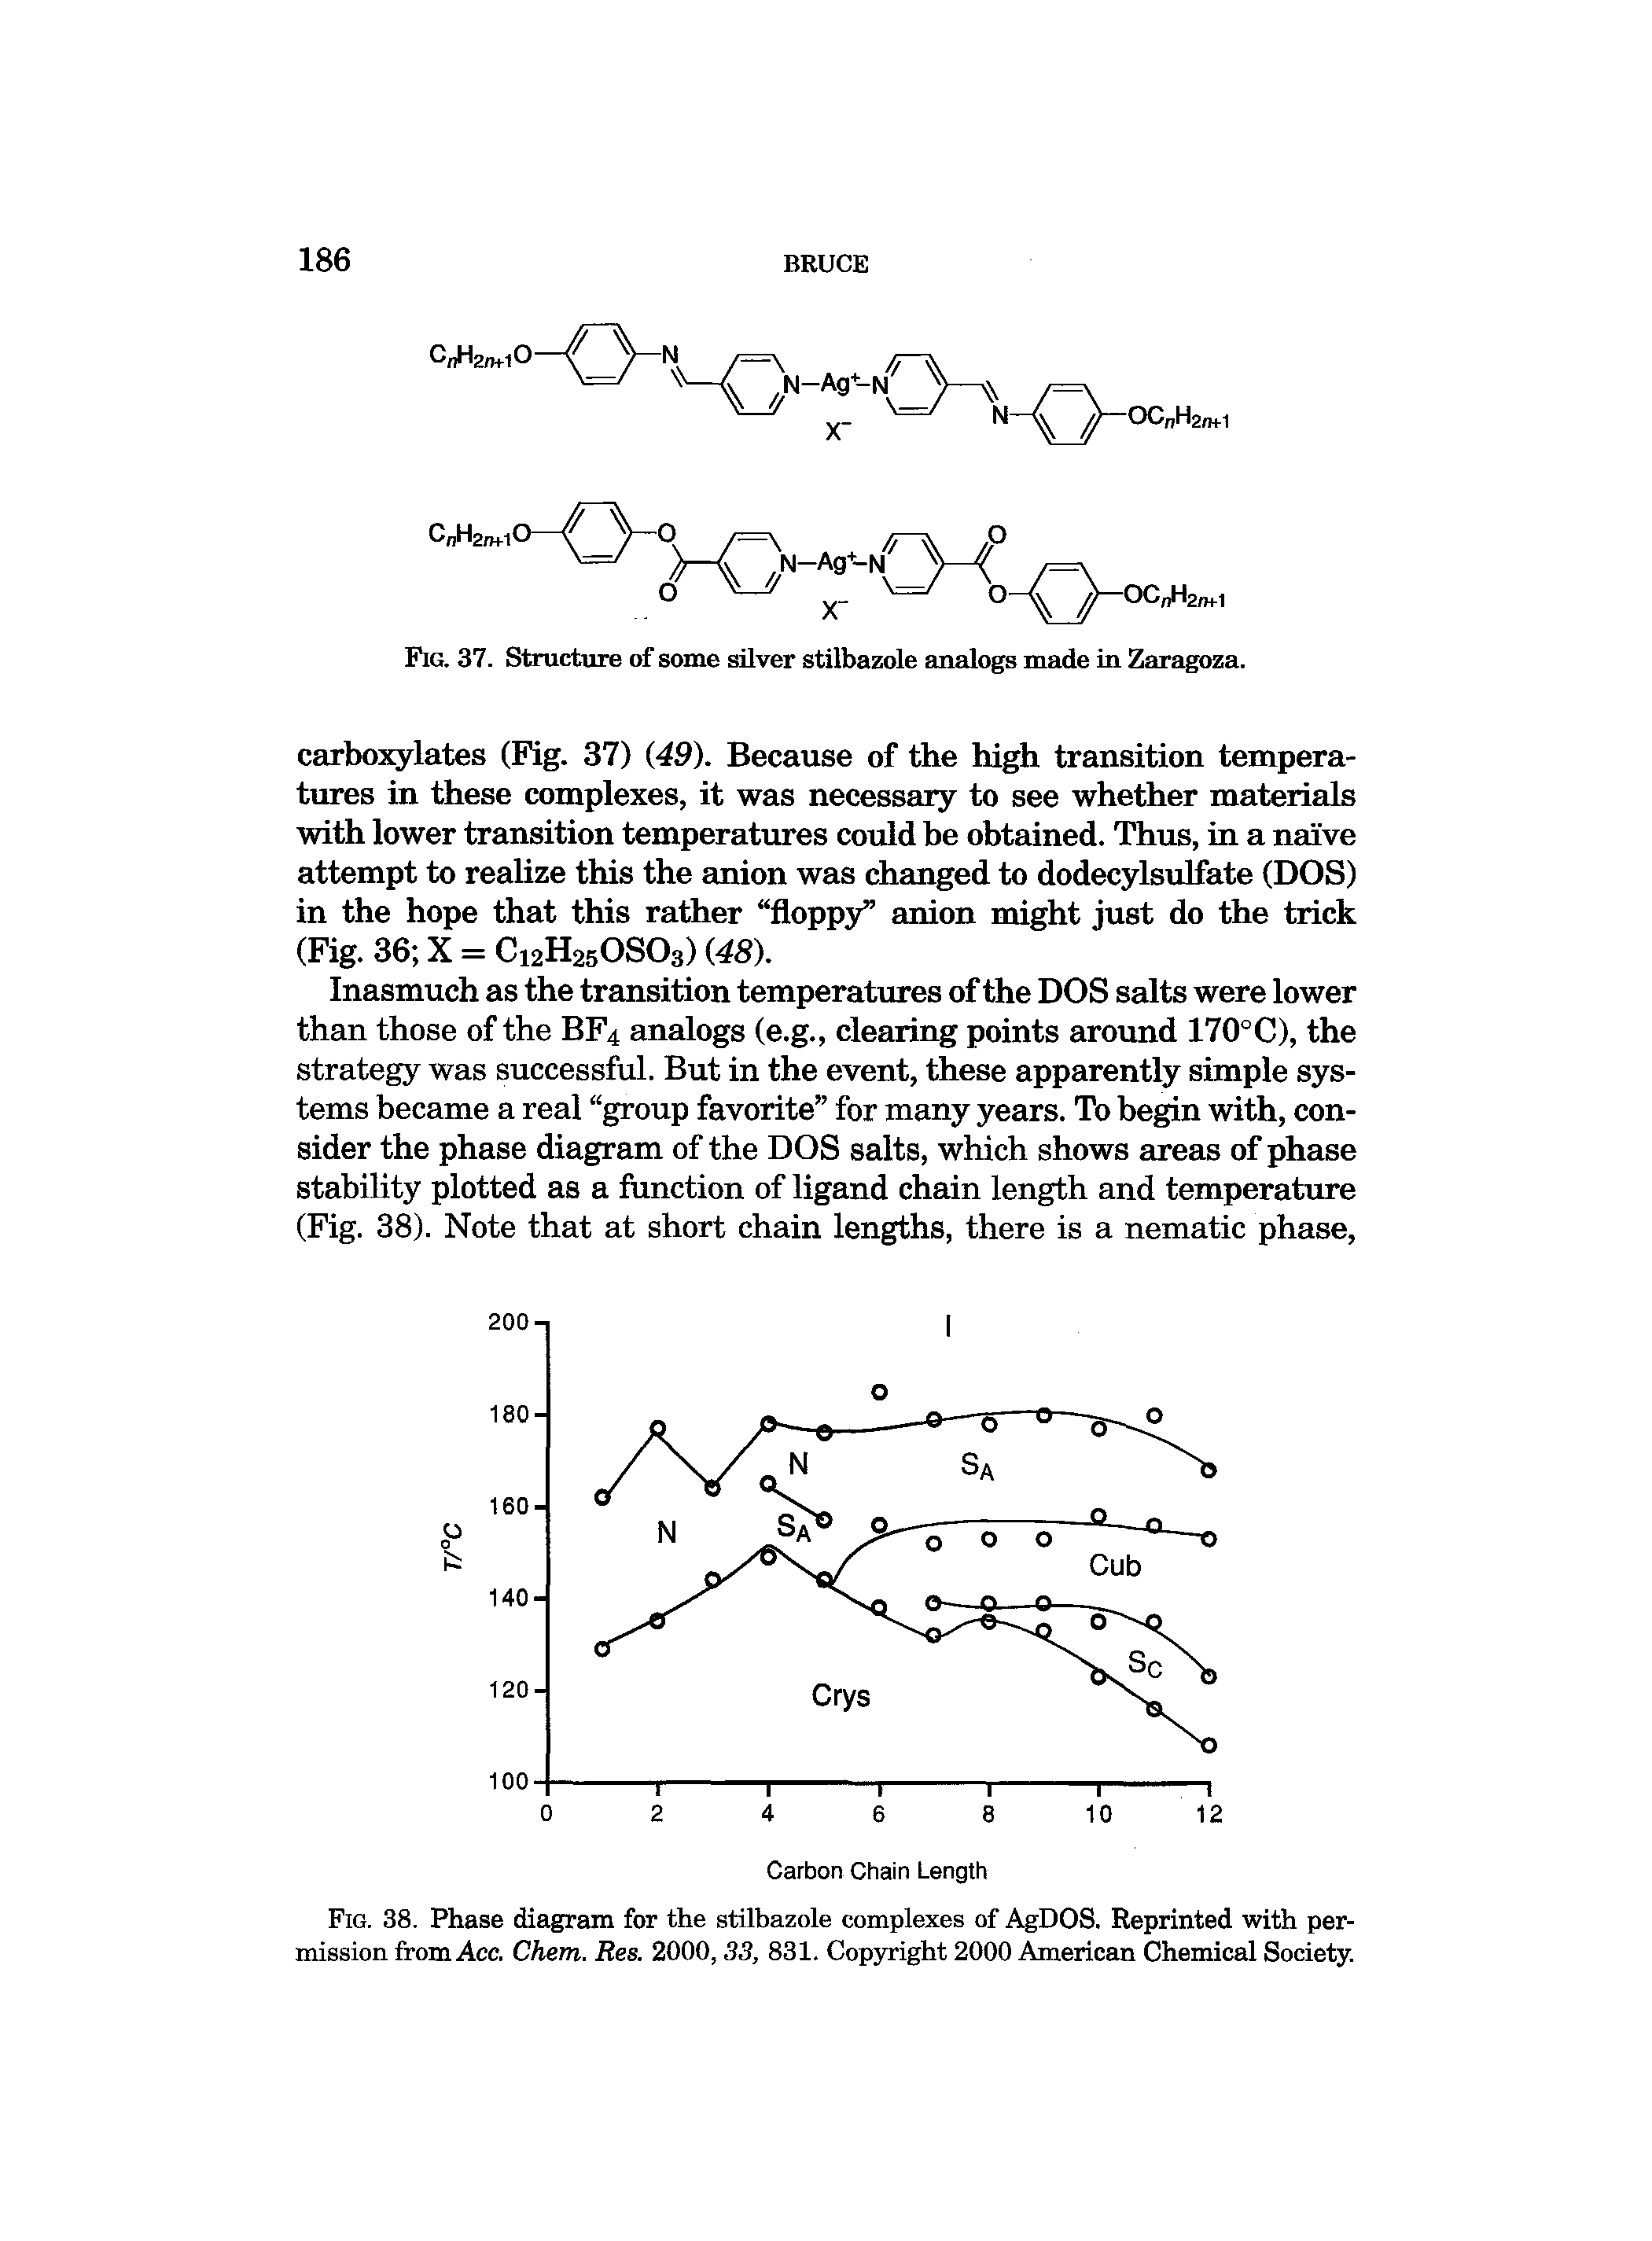 Fig. 38. Phase diagram for the stilbazole complexes of AgDOS. Reprinted with permission from Acc. Chem. Res. 2000,33, 831. Copyright 2000 American Chemical Society.